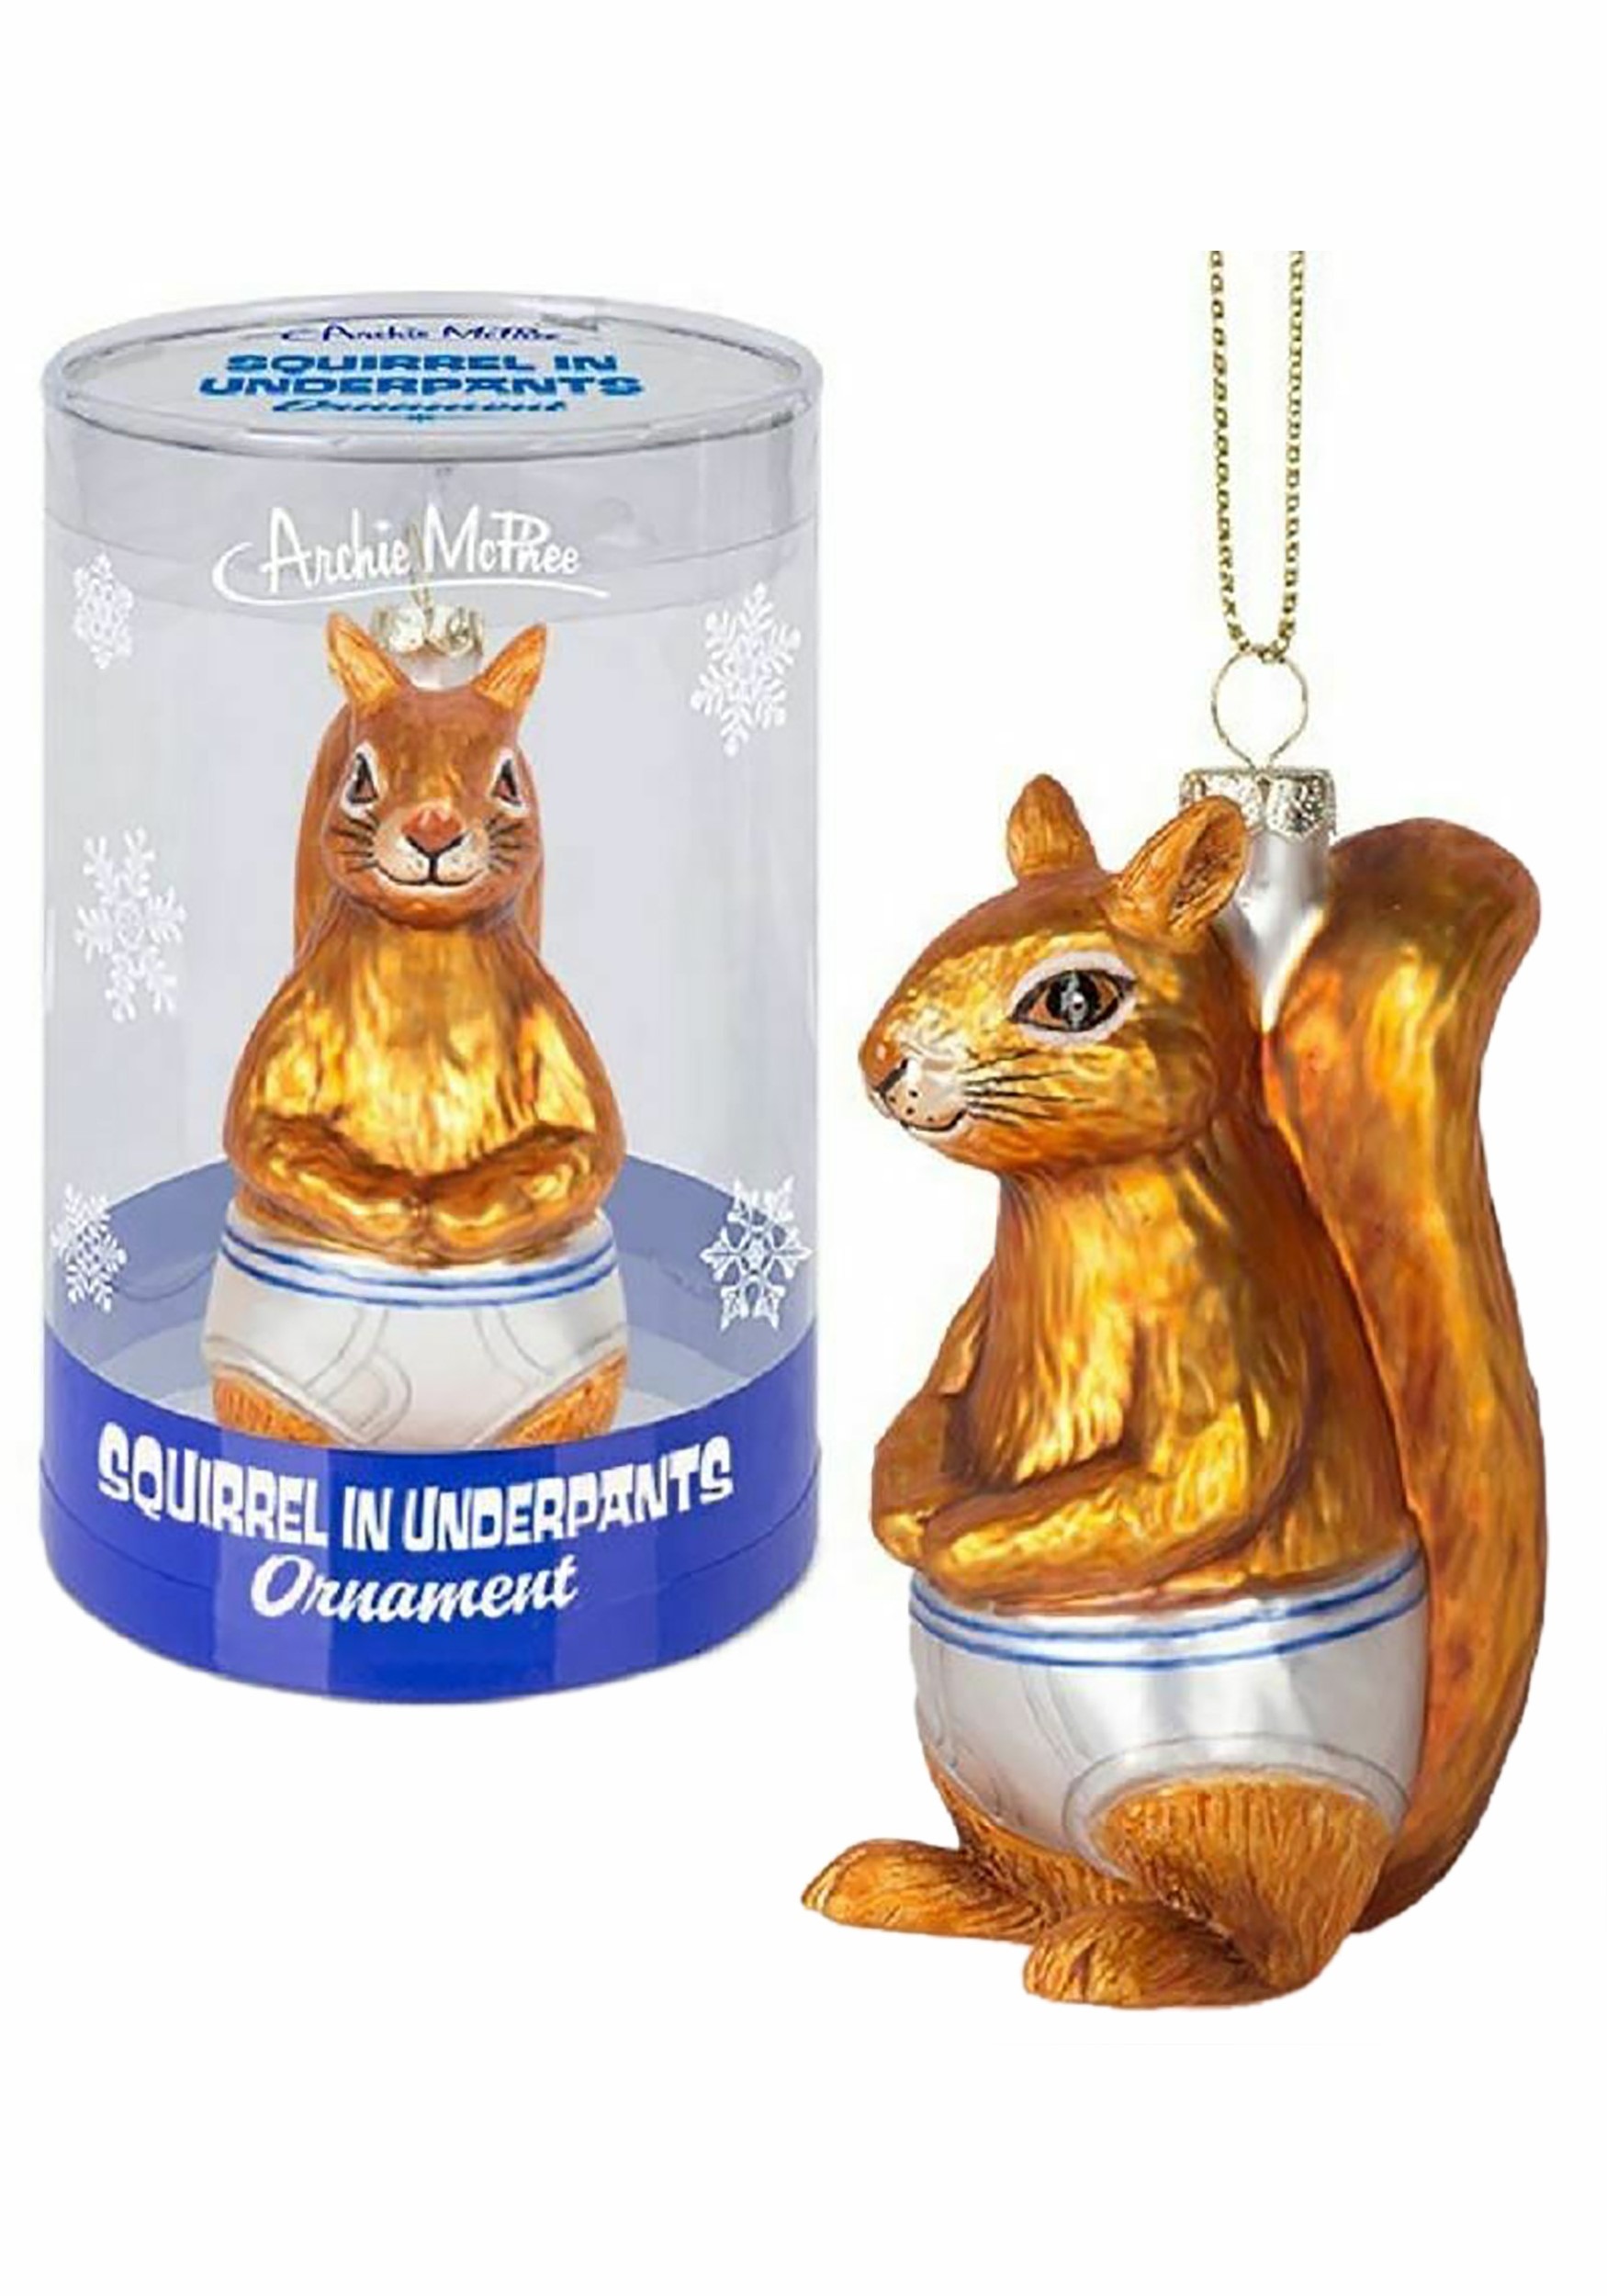 Glass Ornament Squirrel in Underpants